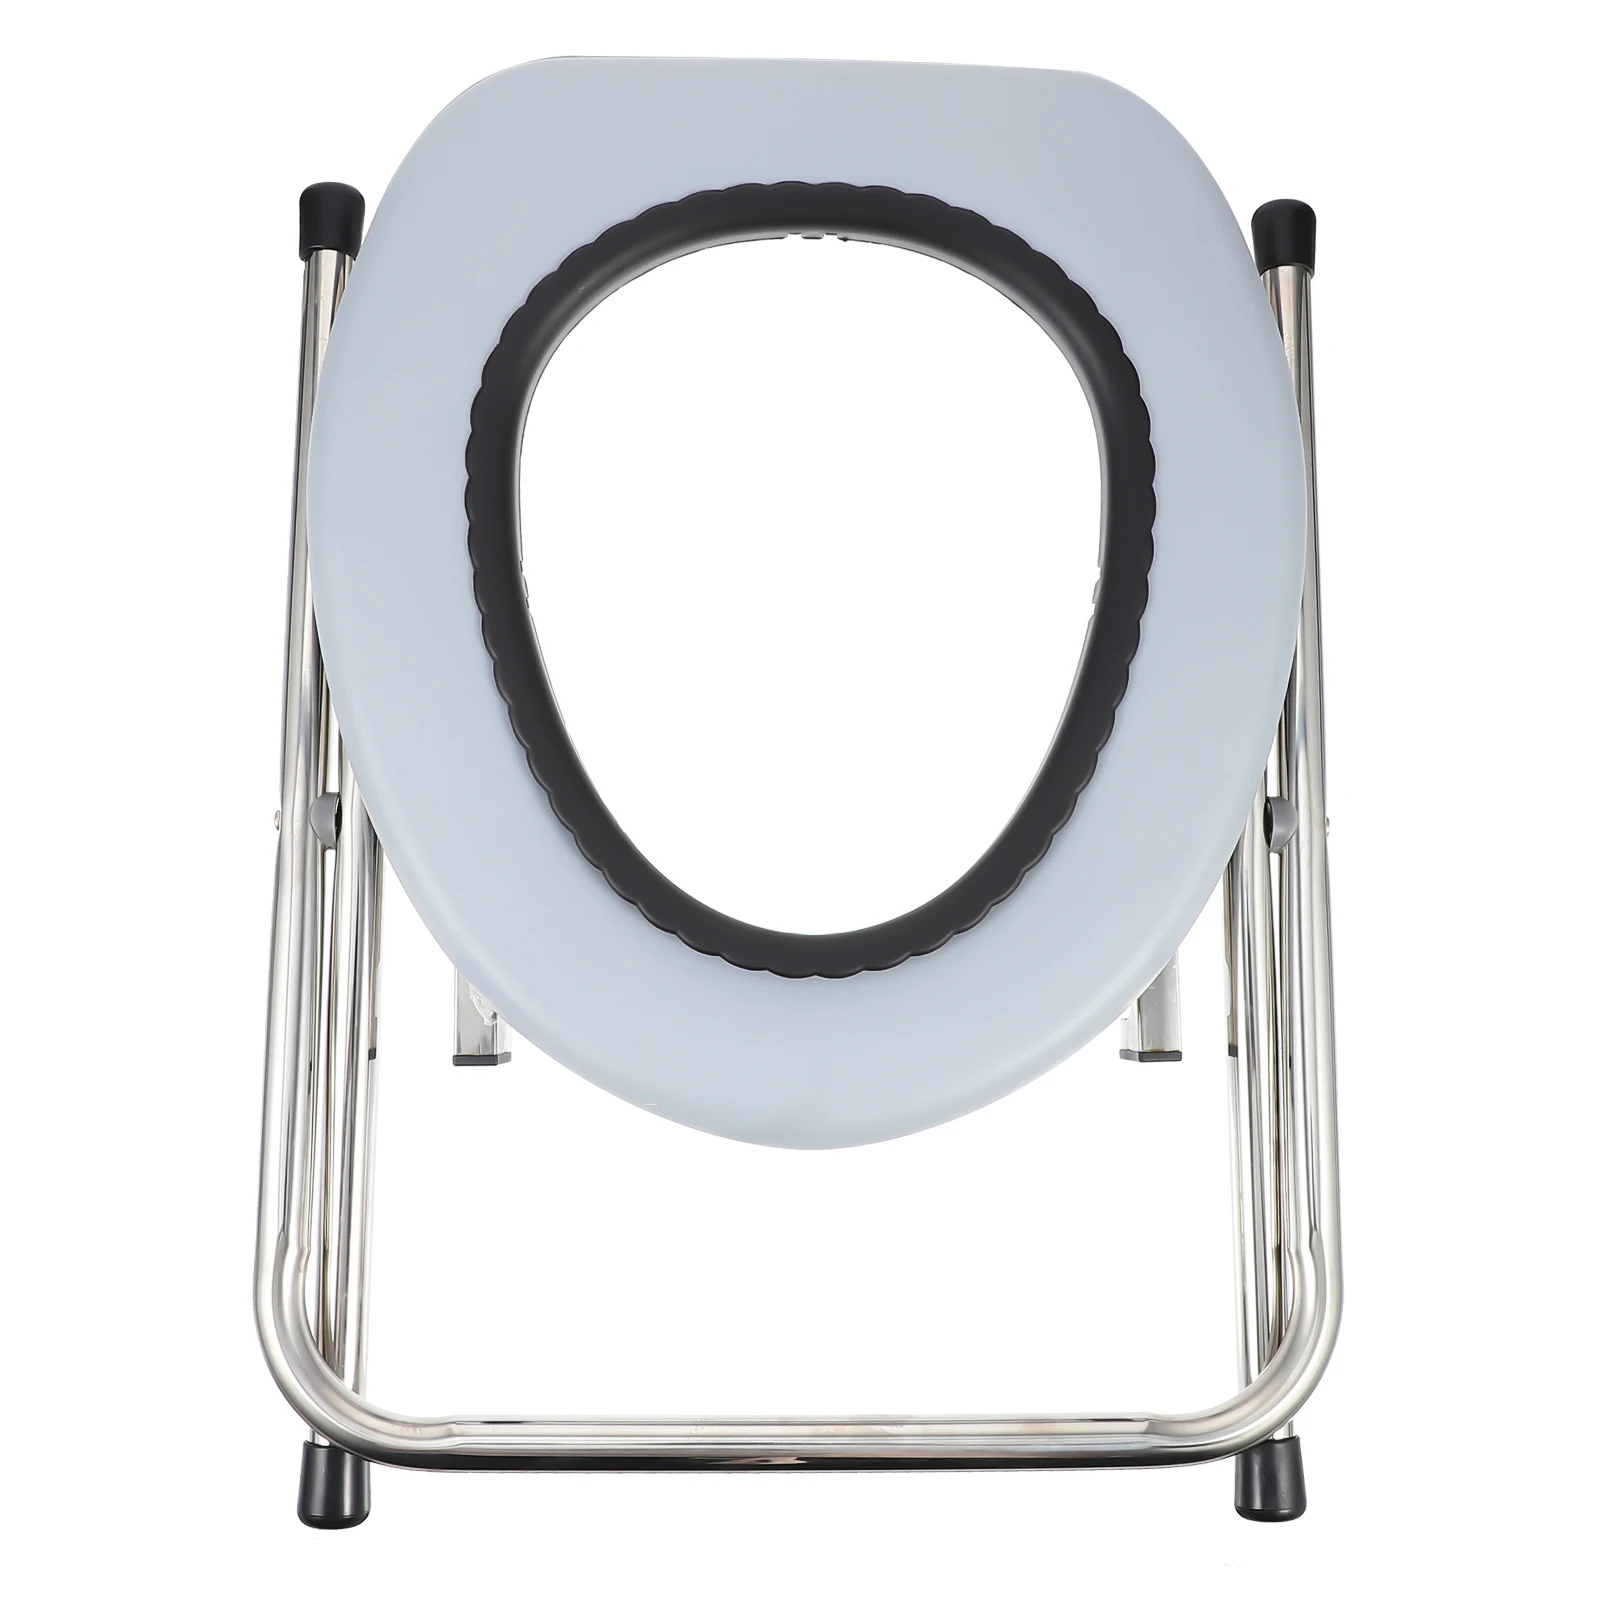 1PC Foldable Bathroom Toilet Chair Portable Toilet Stool Potty Chair for The Old Pregnant Woman Outdoor Camping Hiking Travel